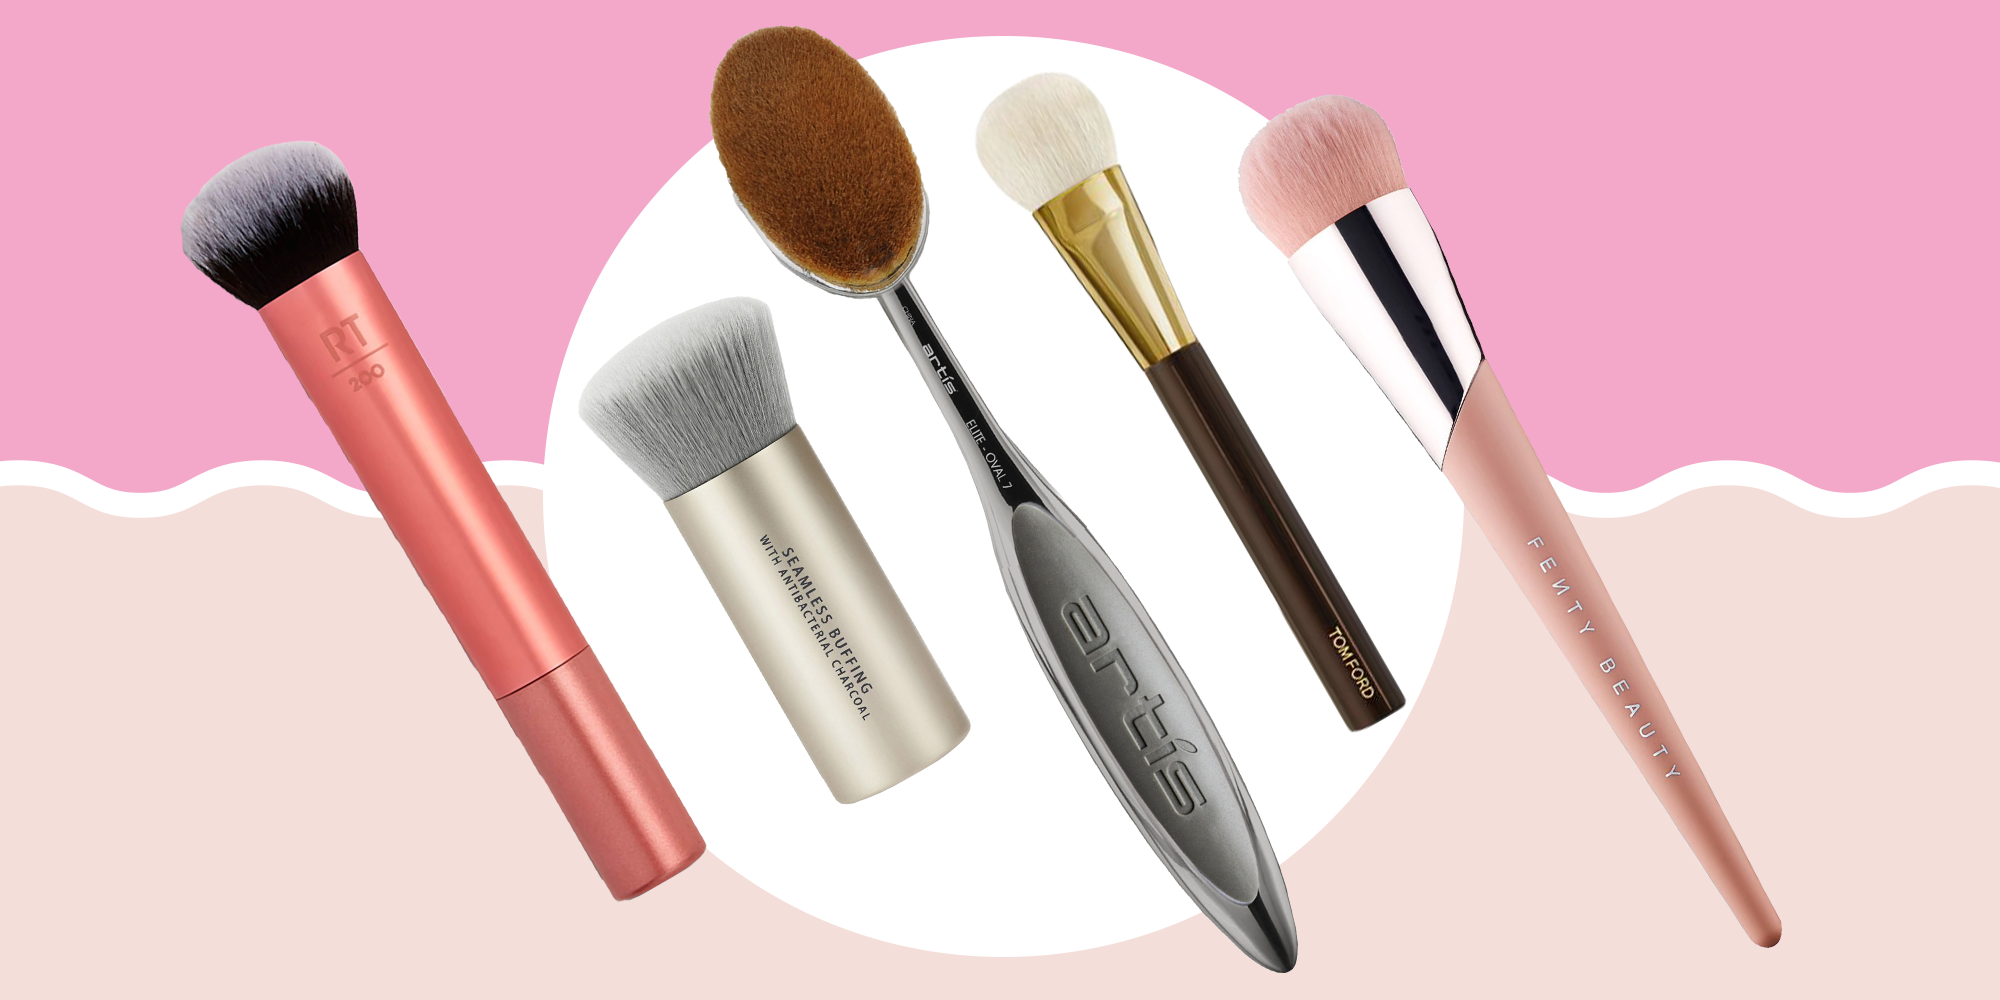 10 Best Foundation Brushes 2020 - How 